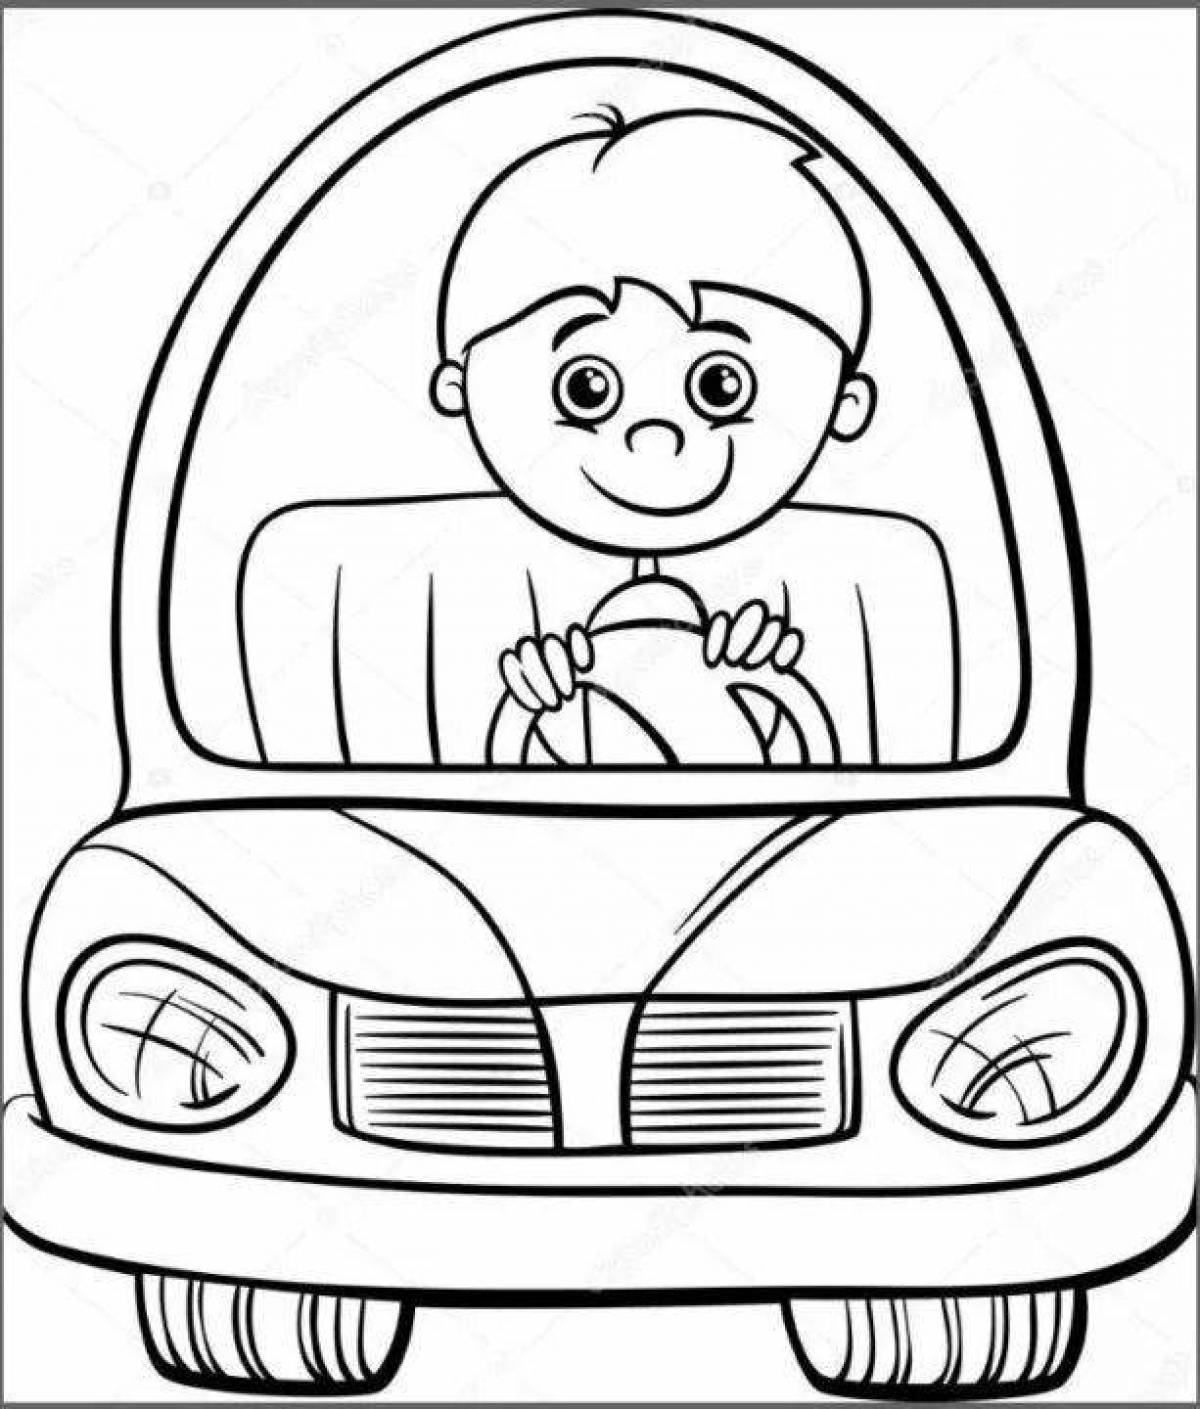 Colorful chauffeur coloring page